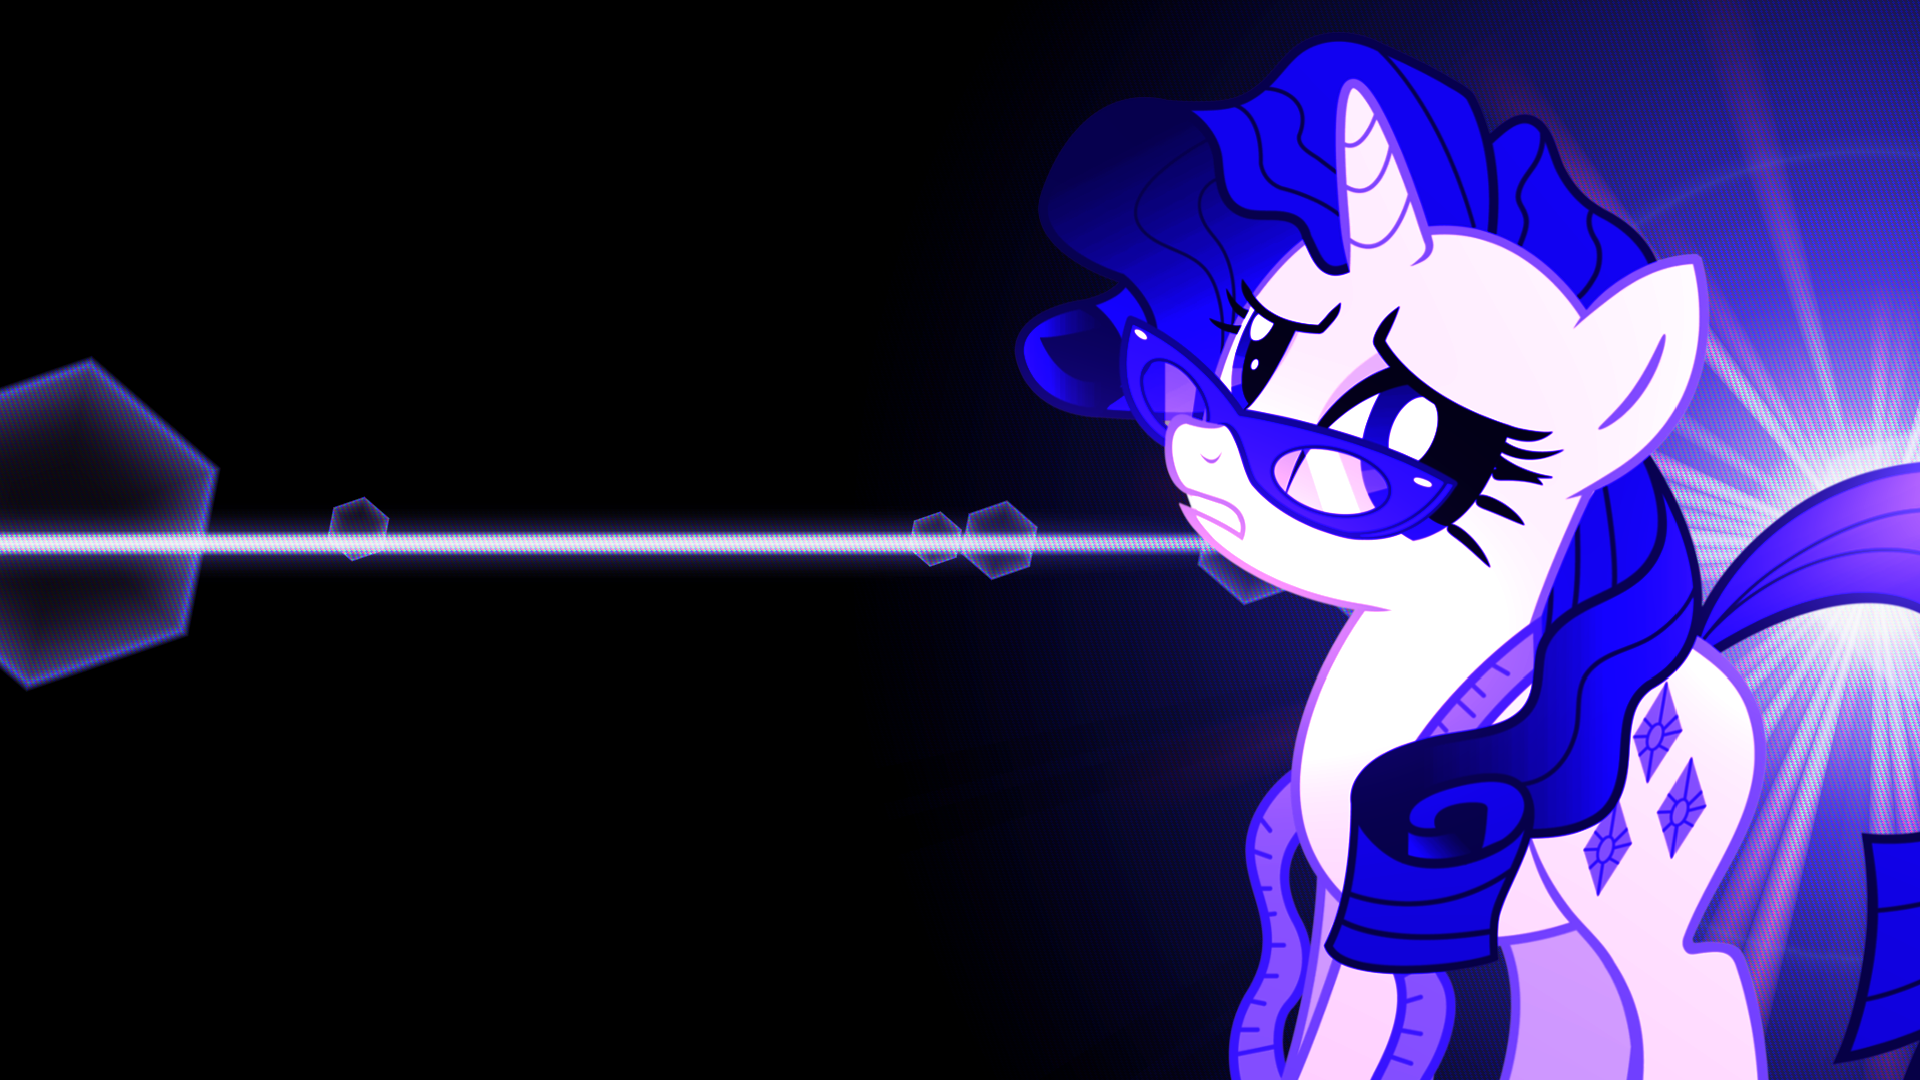 Shiny-shiny pretty lights wallpaper pack. by Clueless313 and Mihaaaa